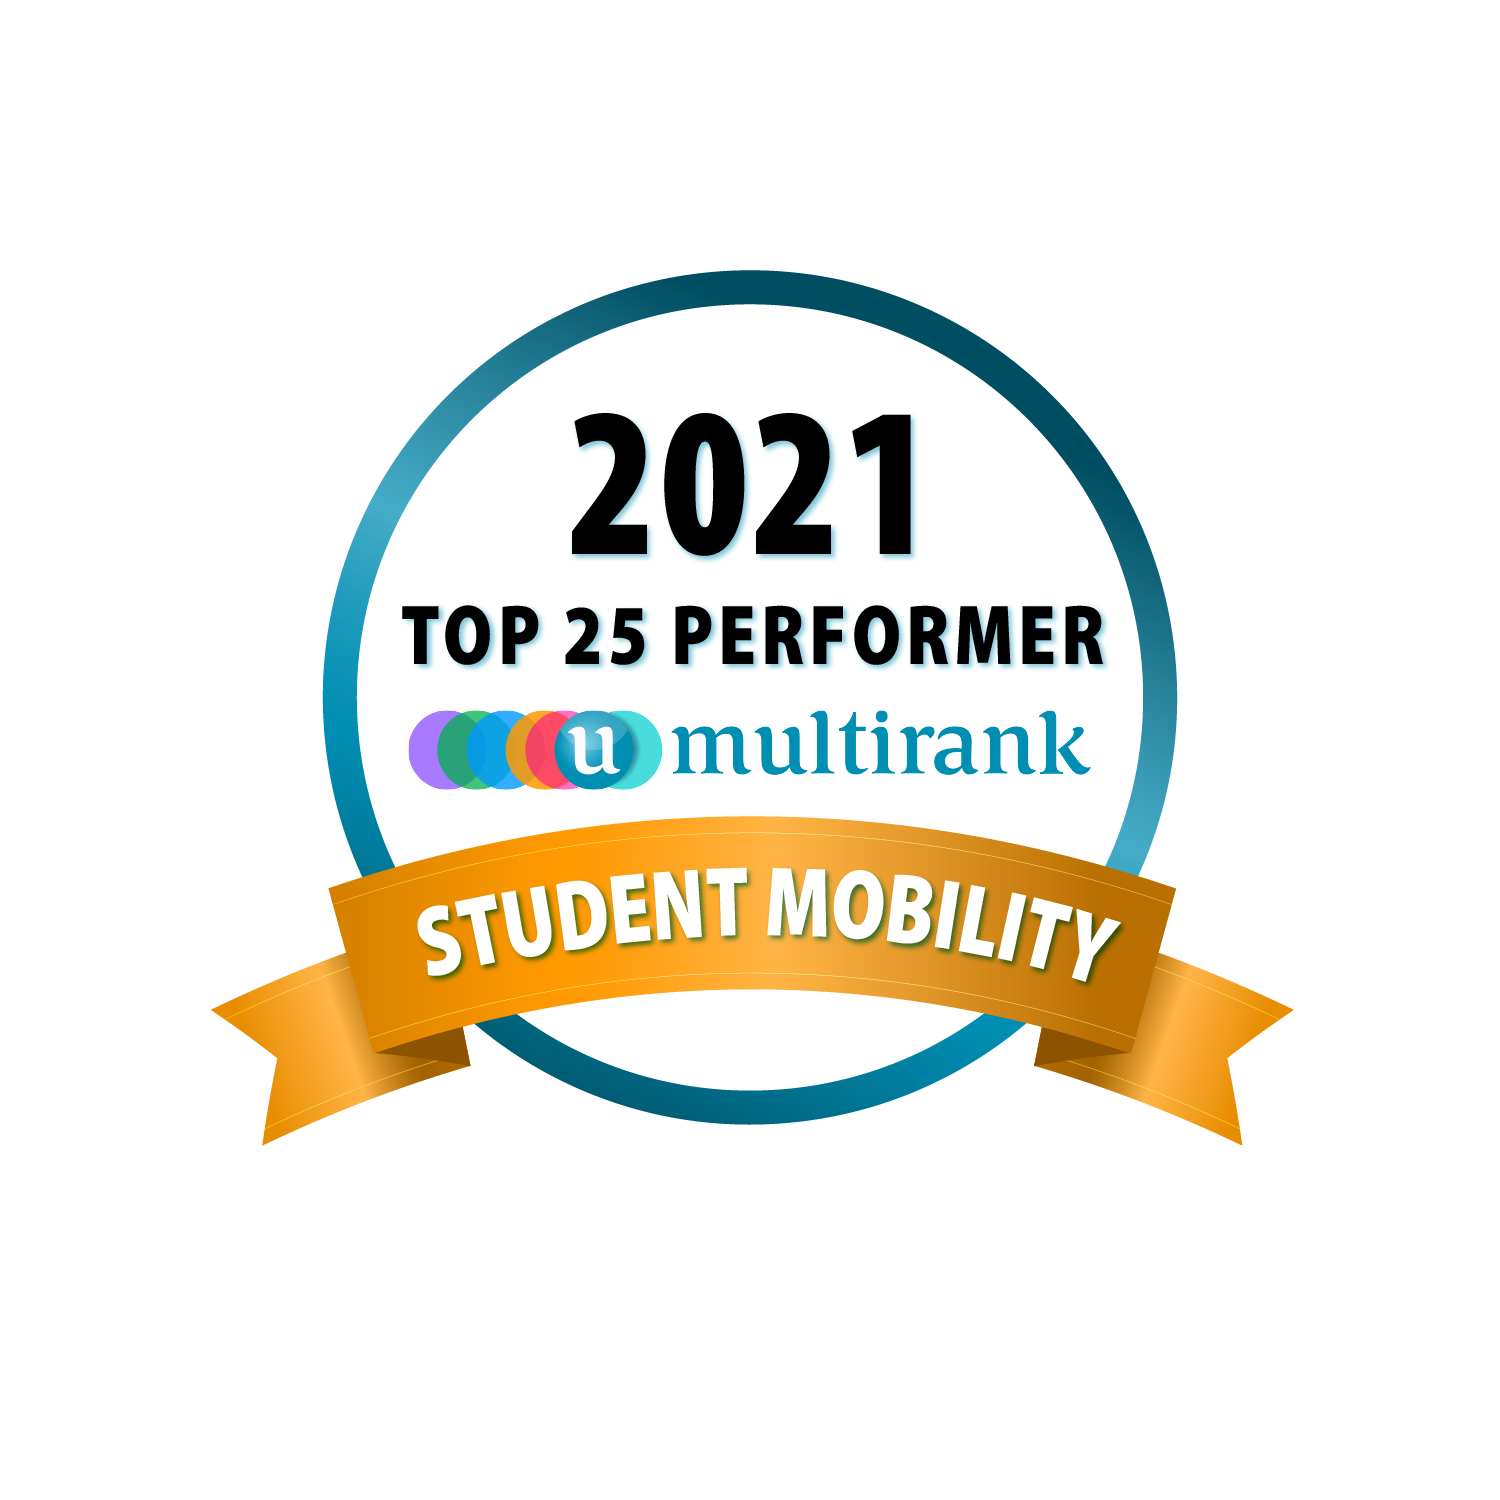 Top 25 performer in Student Mobility